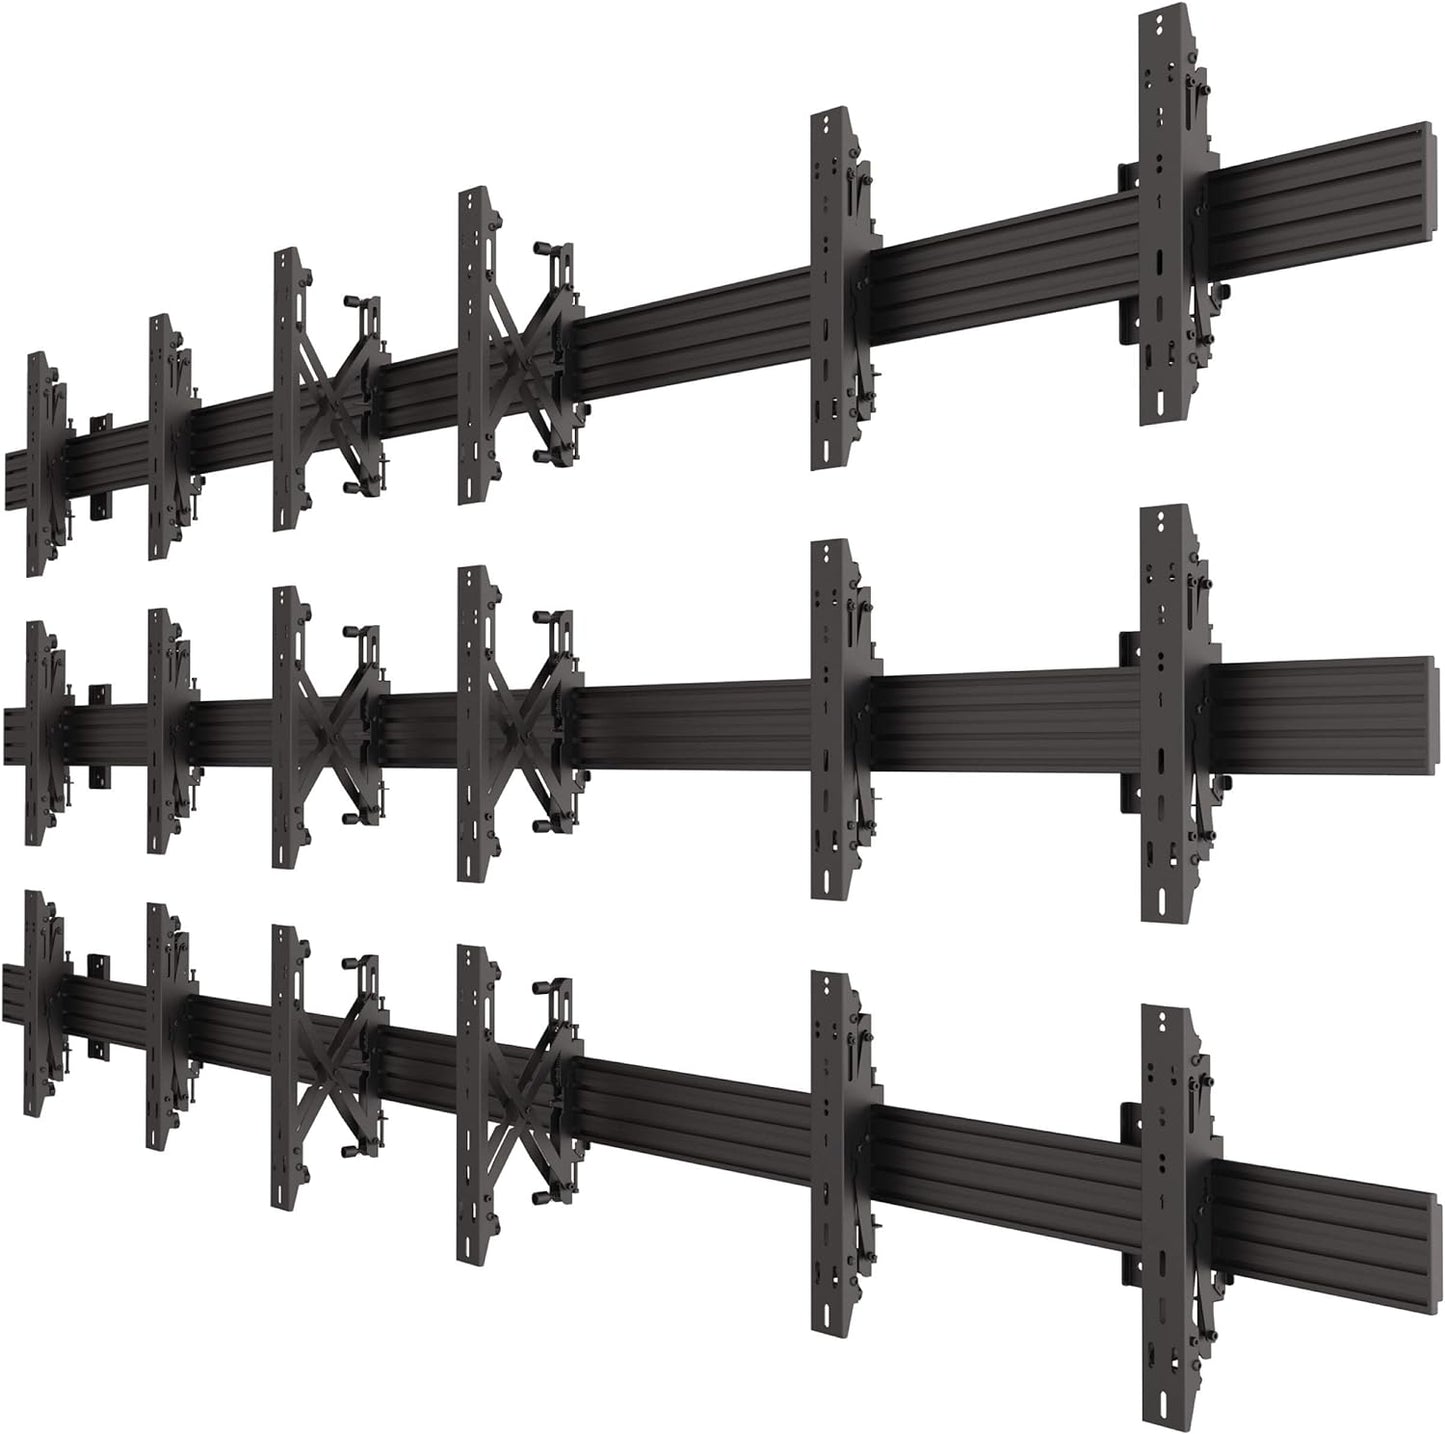 3x3 Video Wall Rail Mounting System - Pop out brackets with Microadjustments